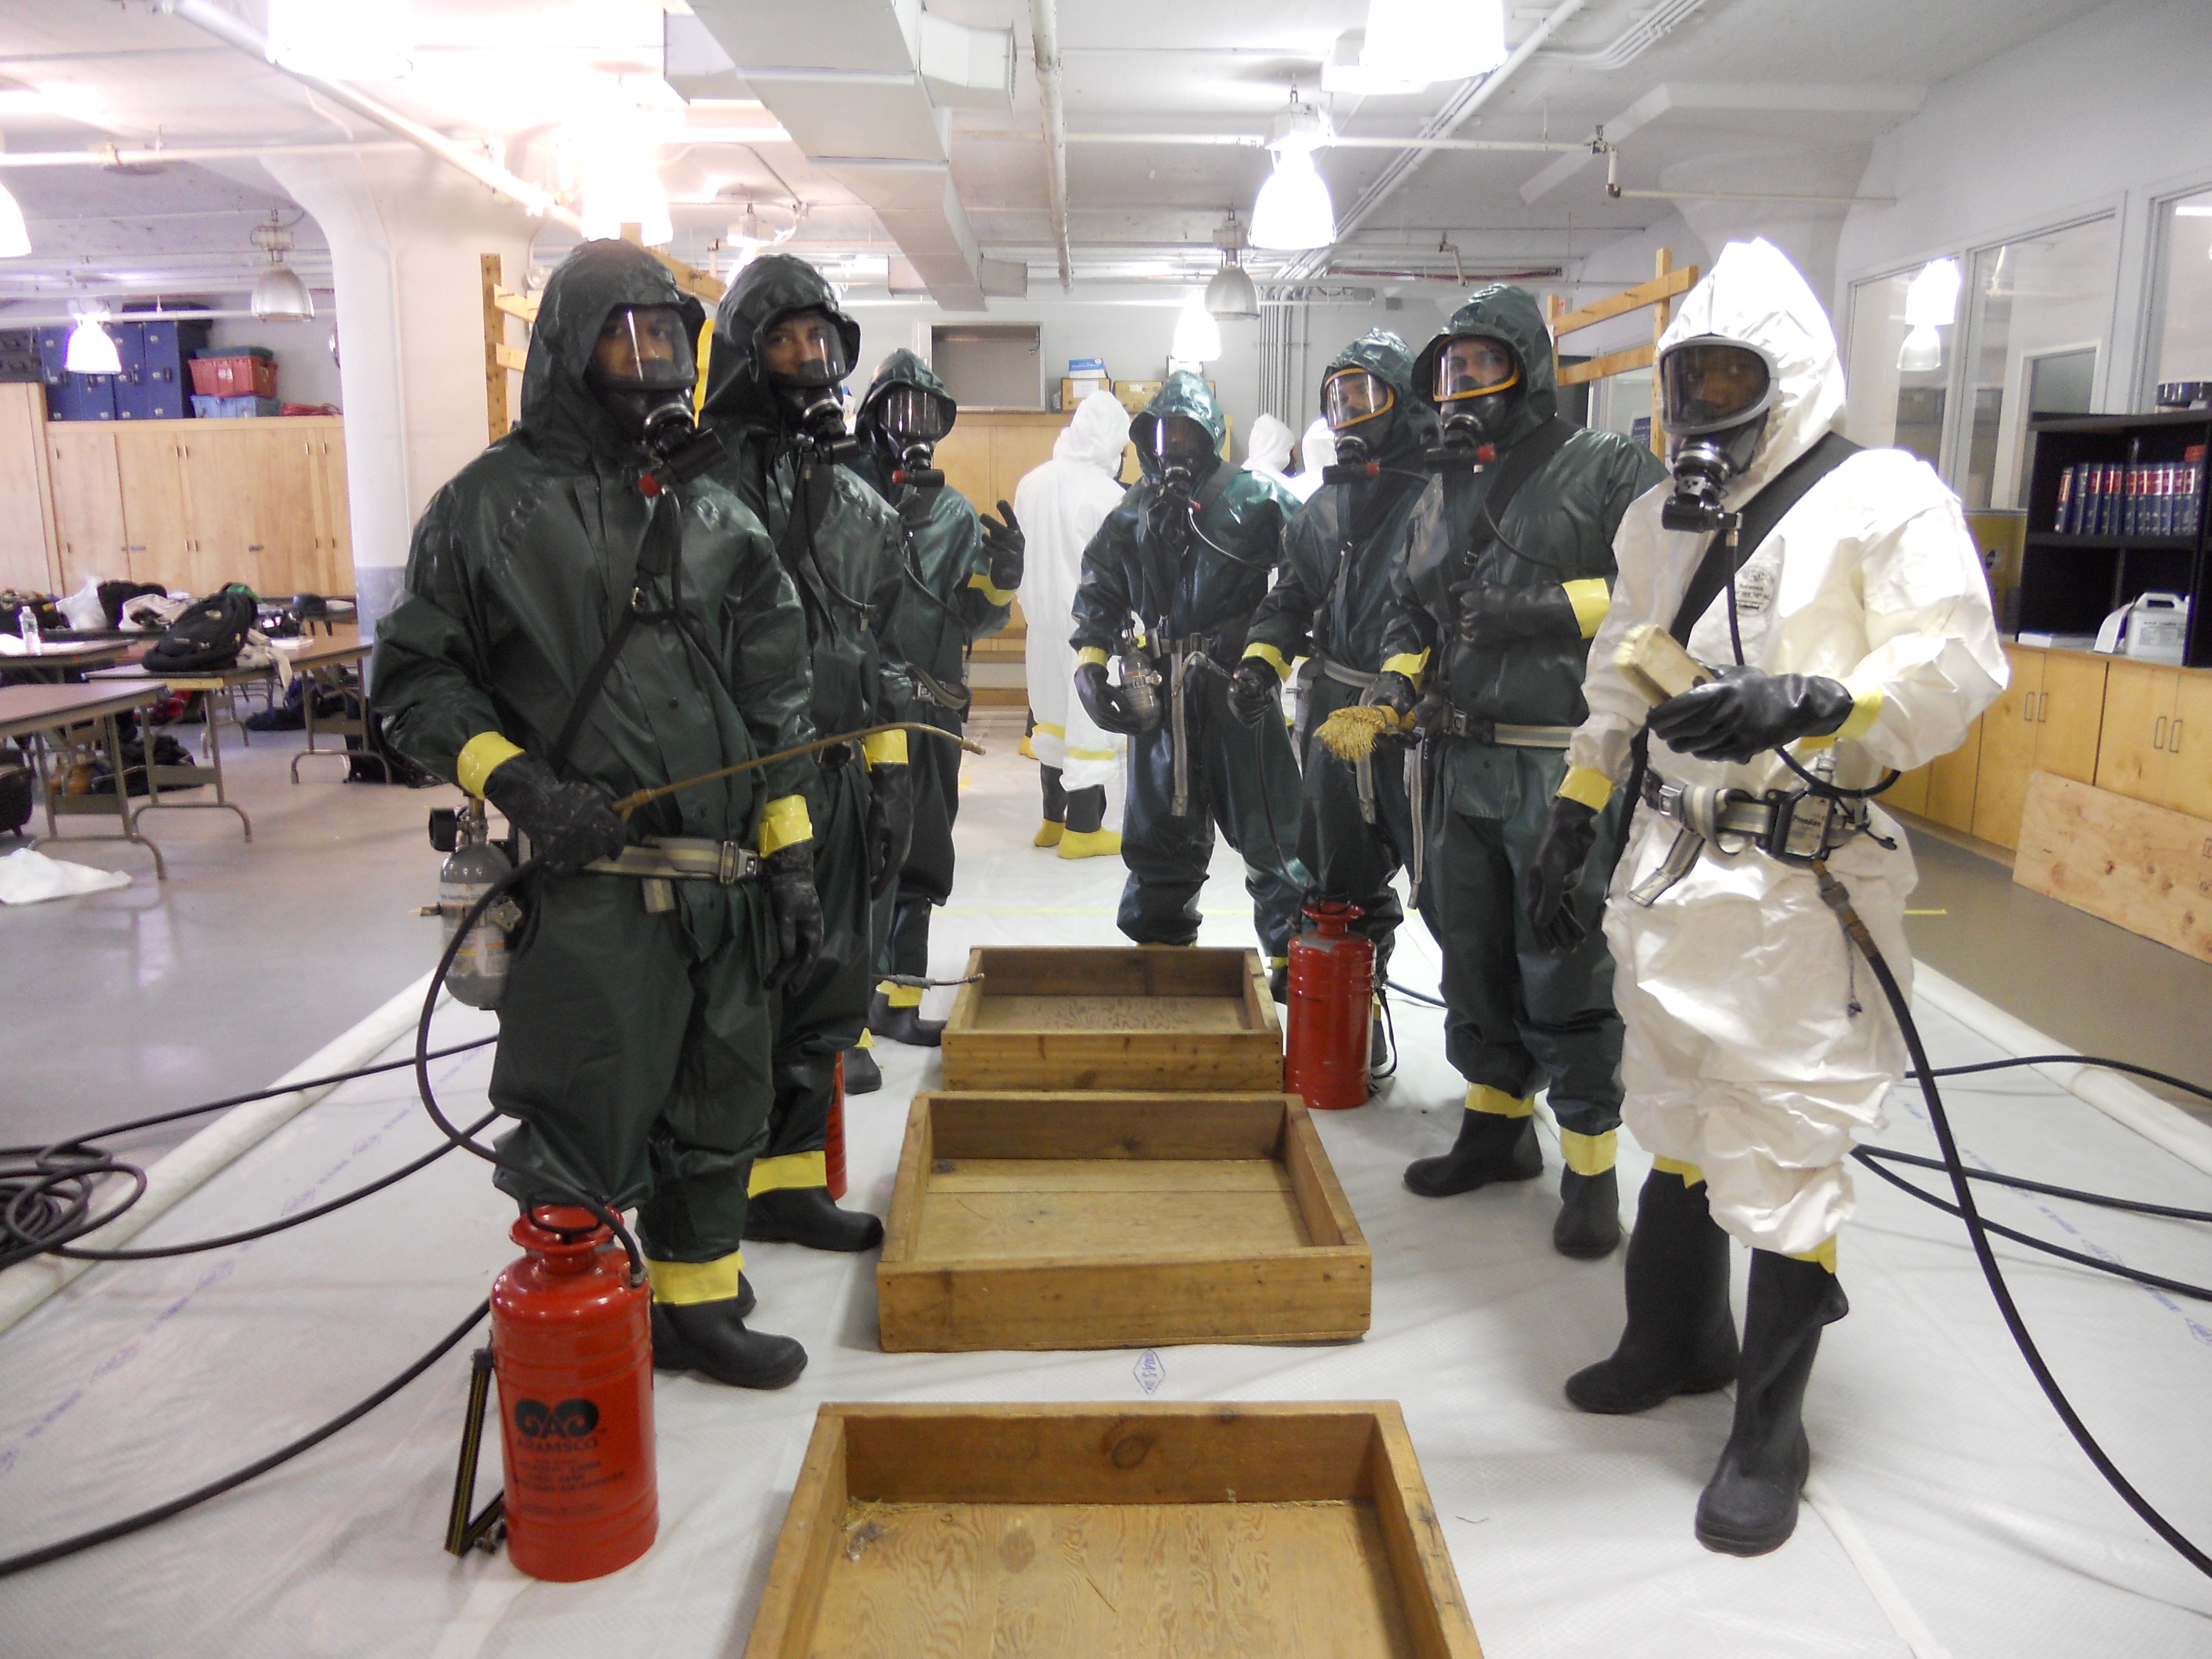 Students wearing HAZMAT suits during a training simulation and exercise. (Photo courtesy of Joan Staunton, Atlantic Center for Occupational Health and Safety).